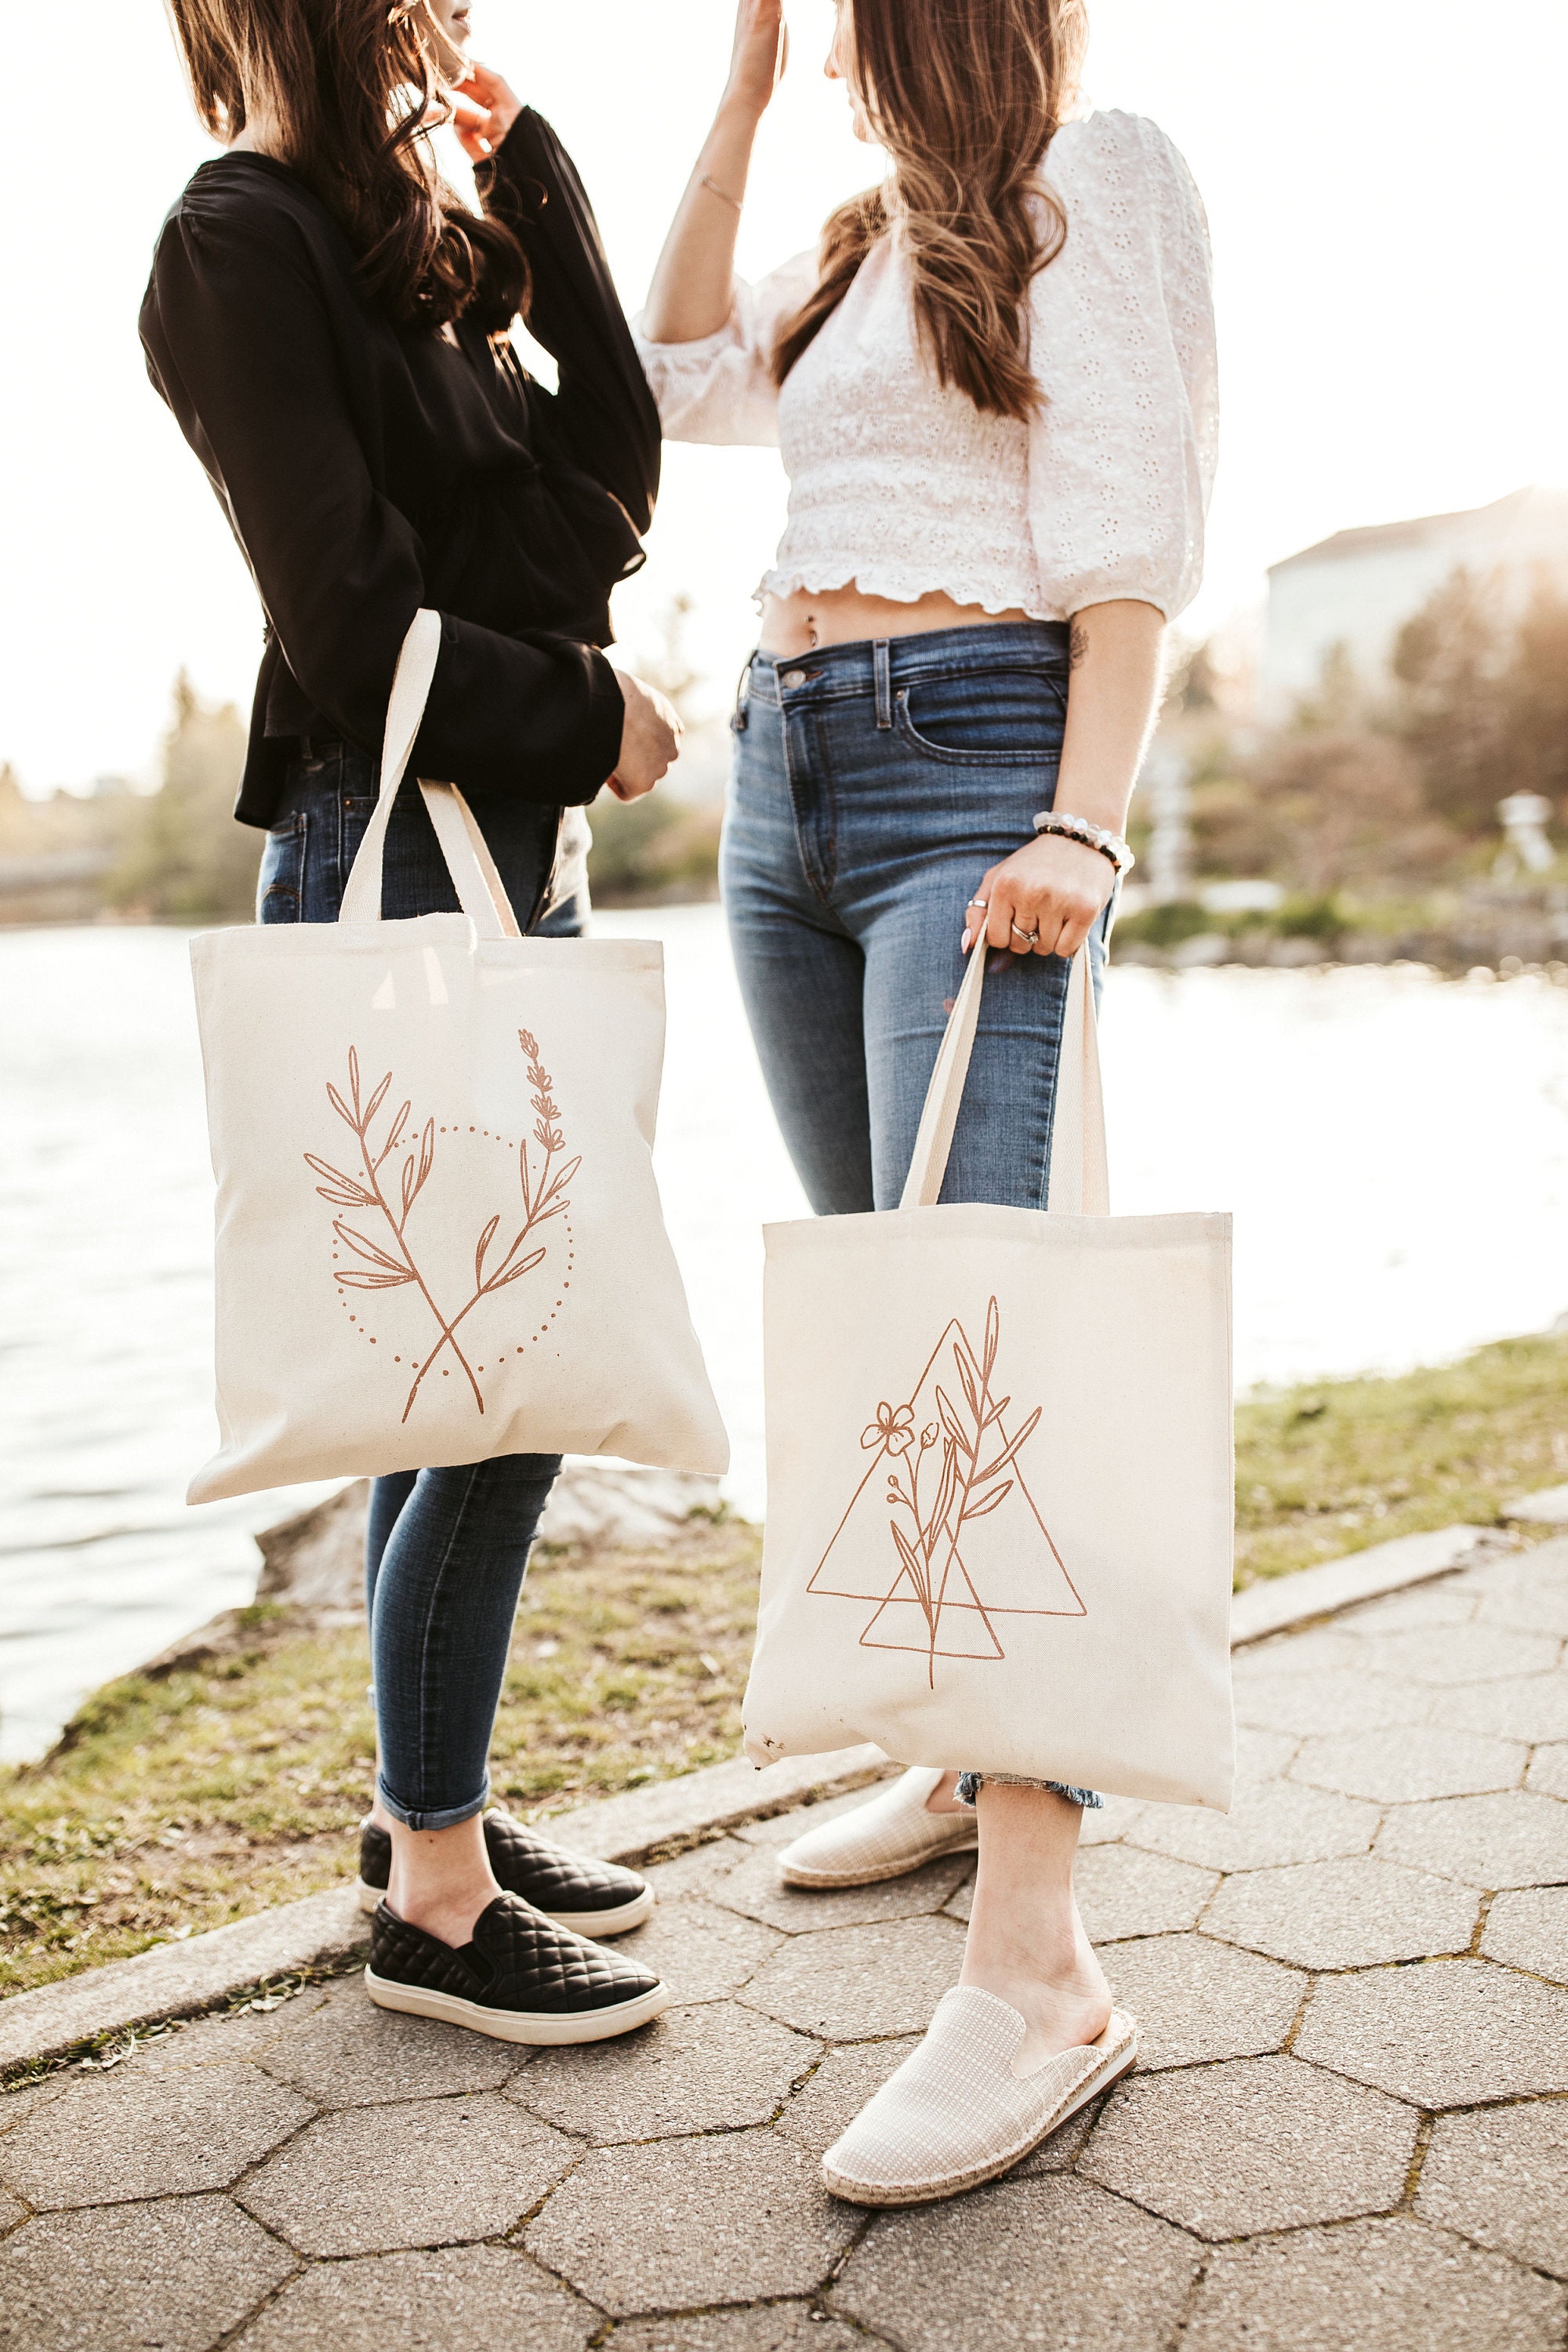 4 Pcs Floral Canvas Tote Bag for Women Teenagers Minimalist Bouquet Cute  Tote Bags Aesthetic Reusable Boho Flower Tote Bag